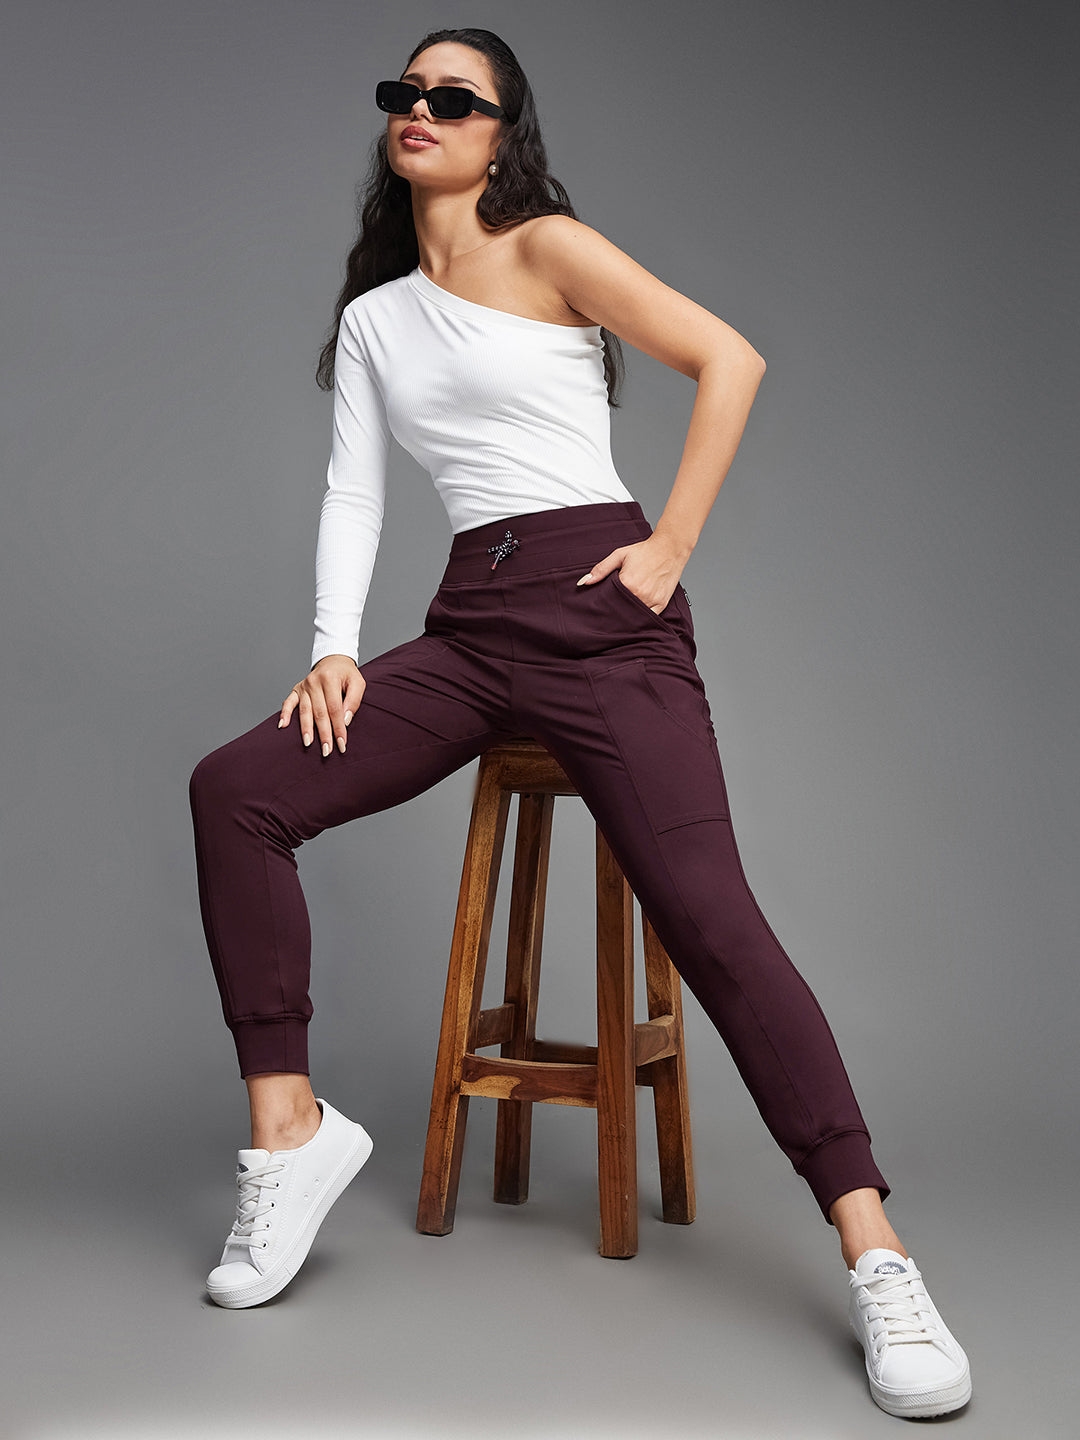 Solid Wine Relaxed Fit Regular-Length Tiggers